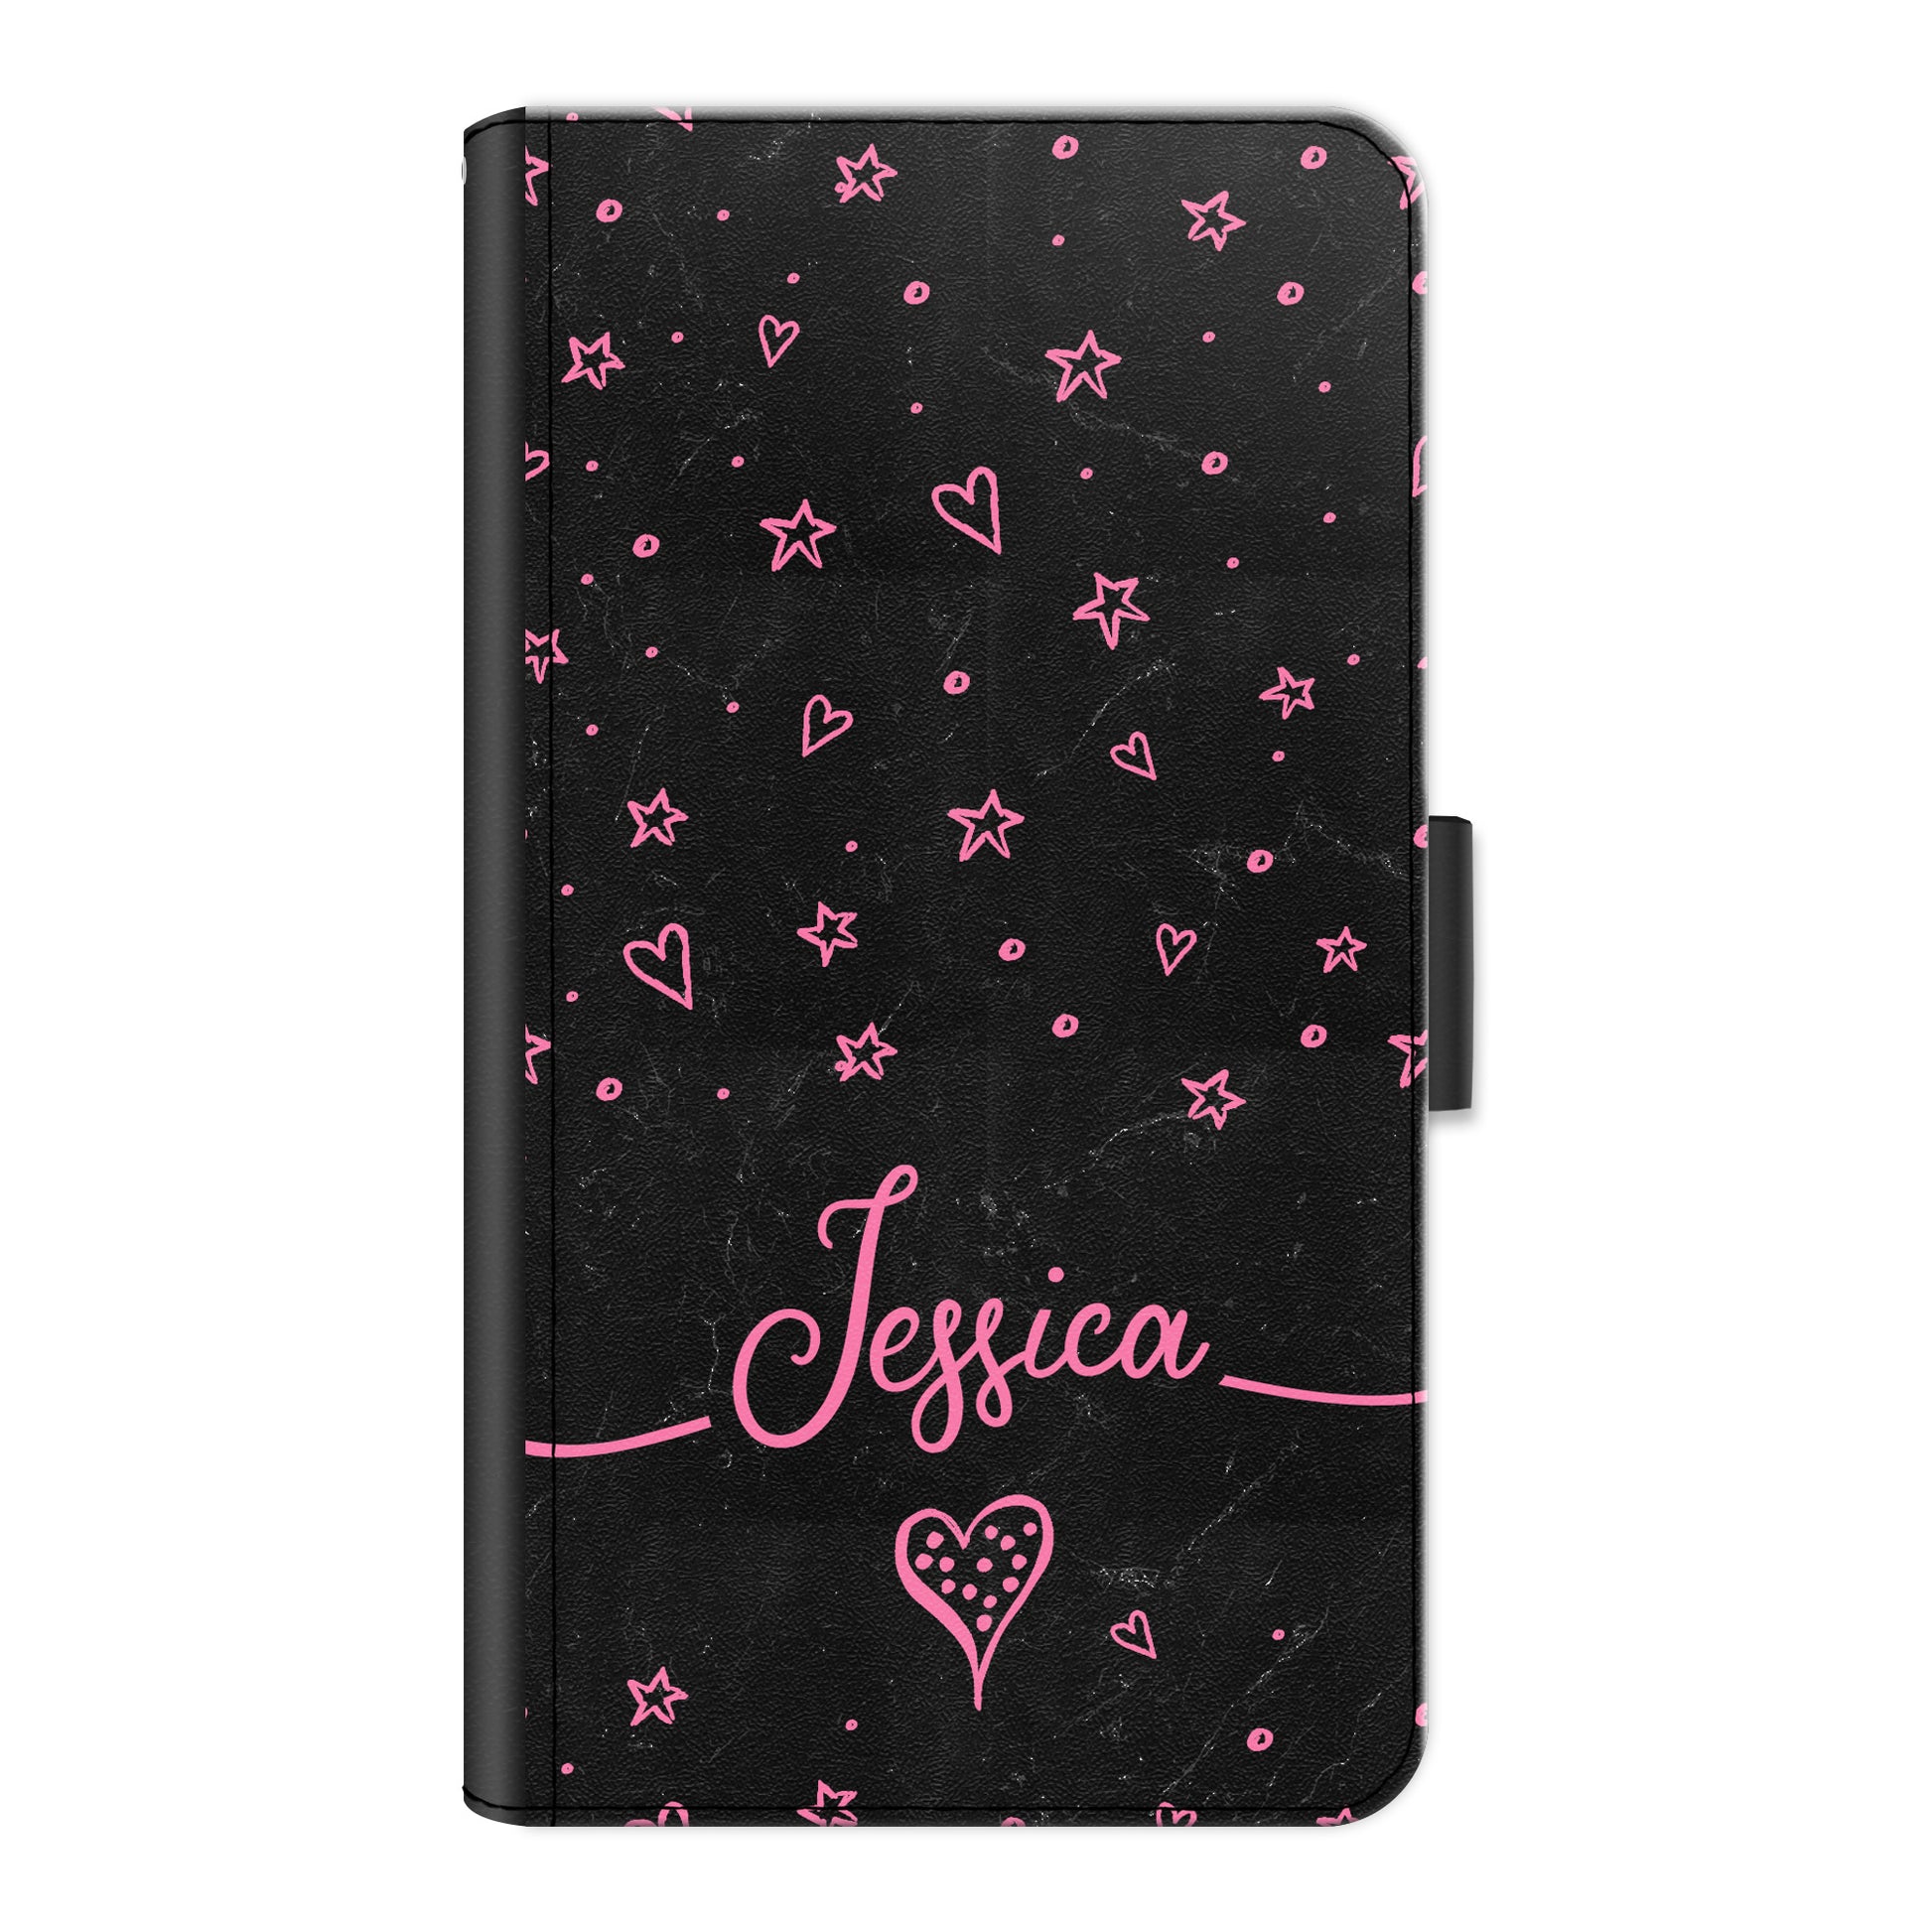 Personalised Huawei Phone Leather Wallet with Pink Stylish text, Stars and Hearts on Black Marble